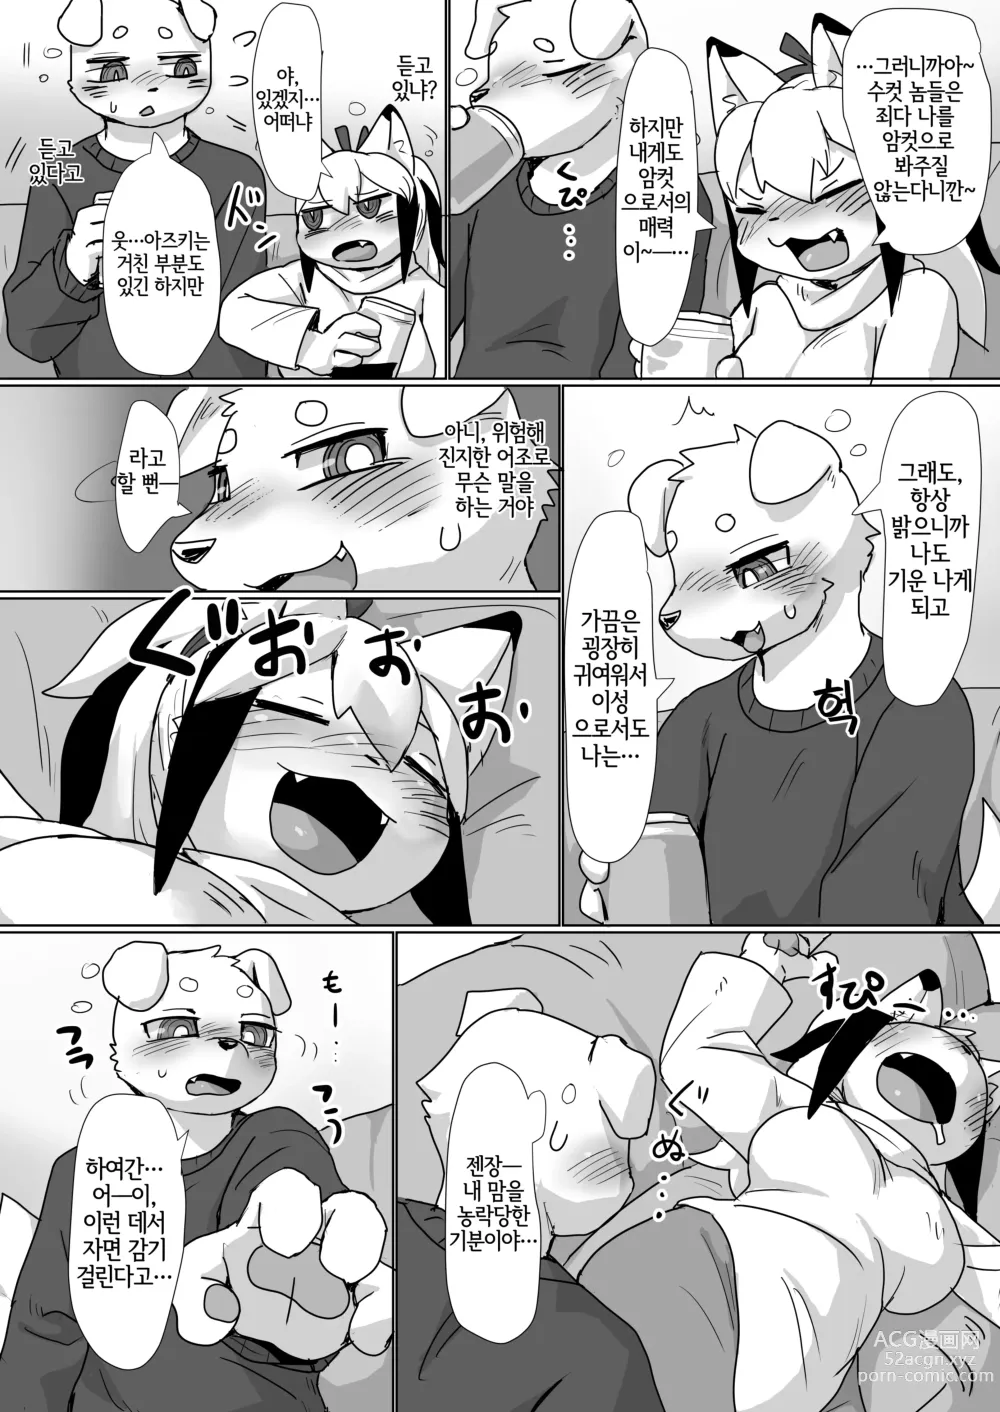 Page 5 of doujinshi 오늘 밤 평소의 술친구와